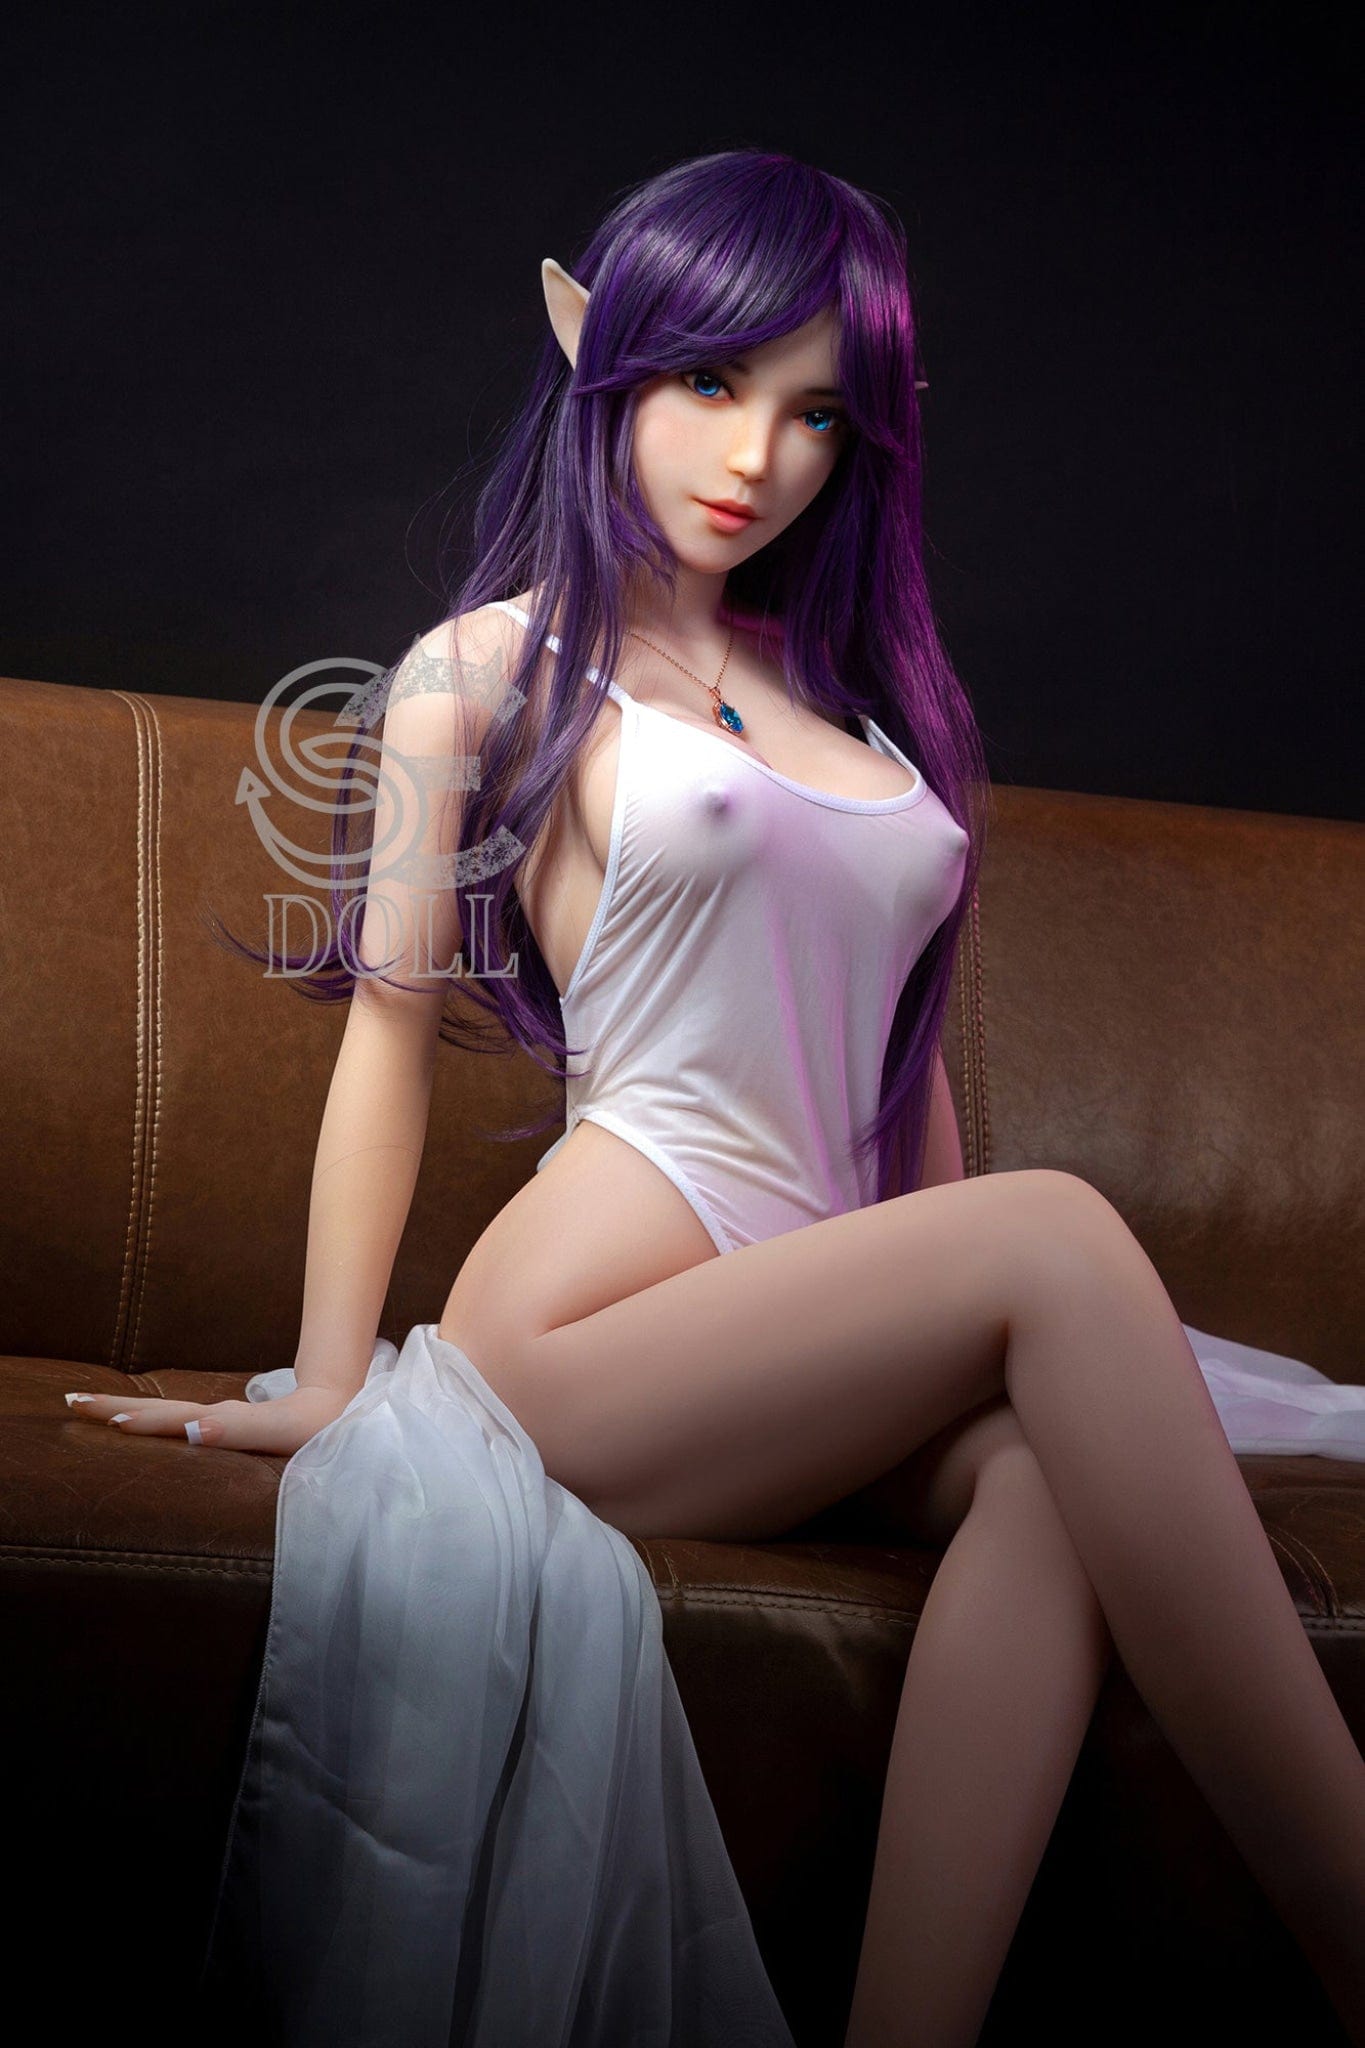 Doll Authority SEX DOLL 5'0" (151cm) - E-Cup Body Amber TPE Realistic Sex Doll - SEDOLL®